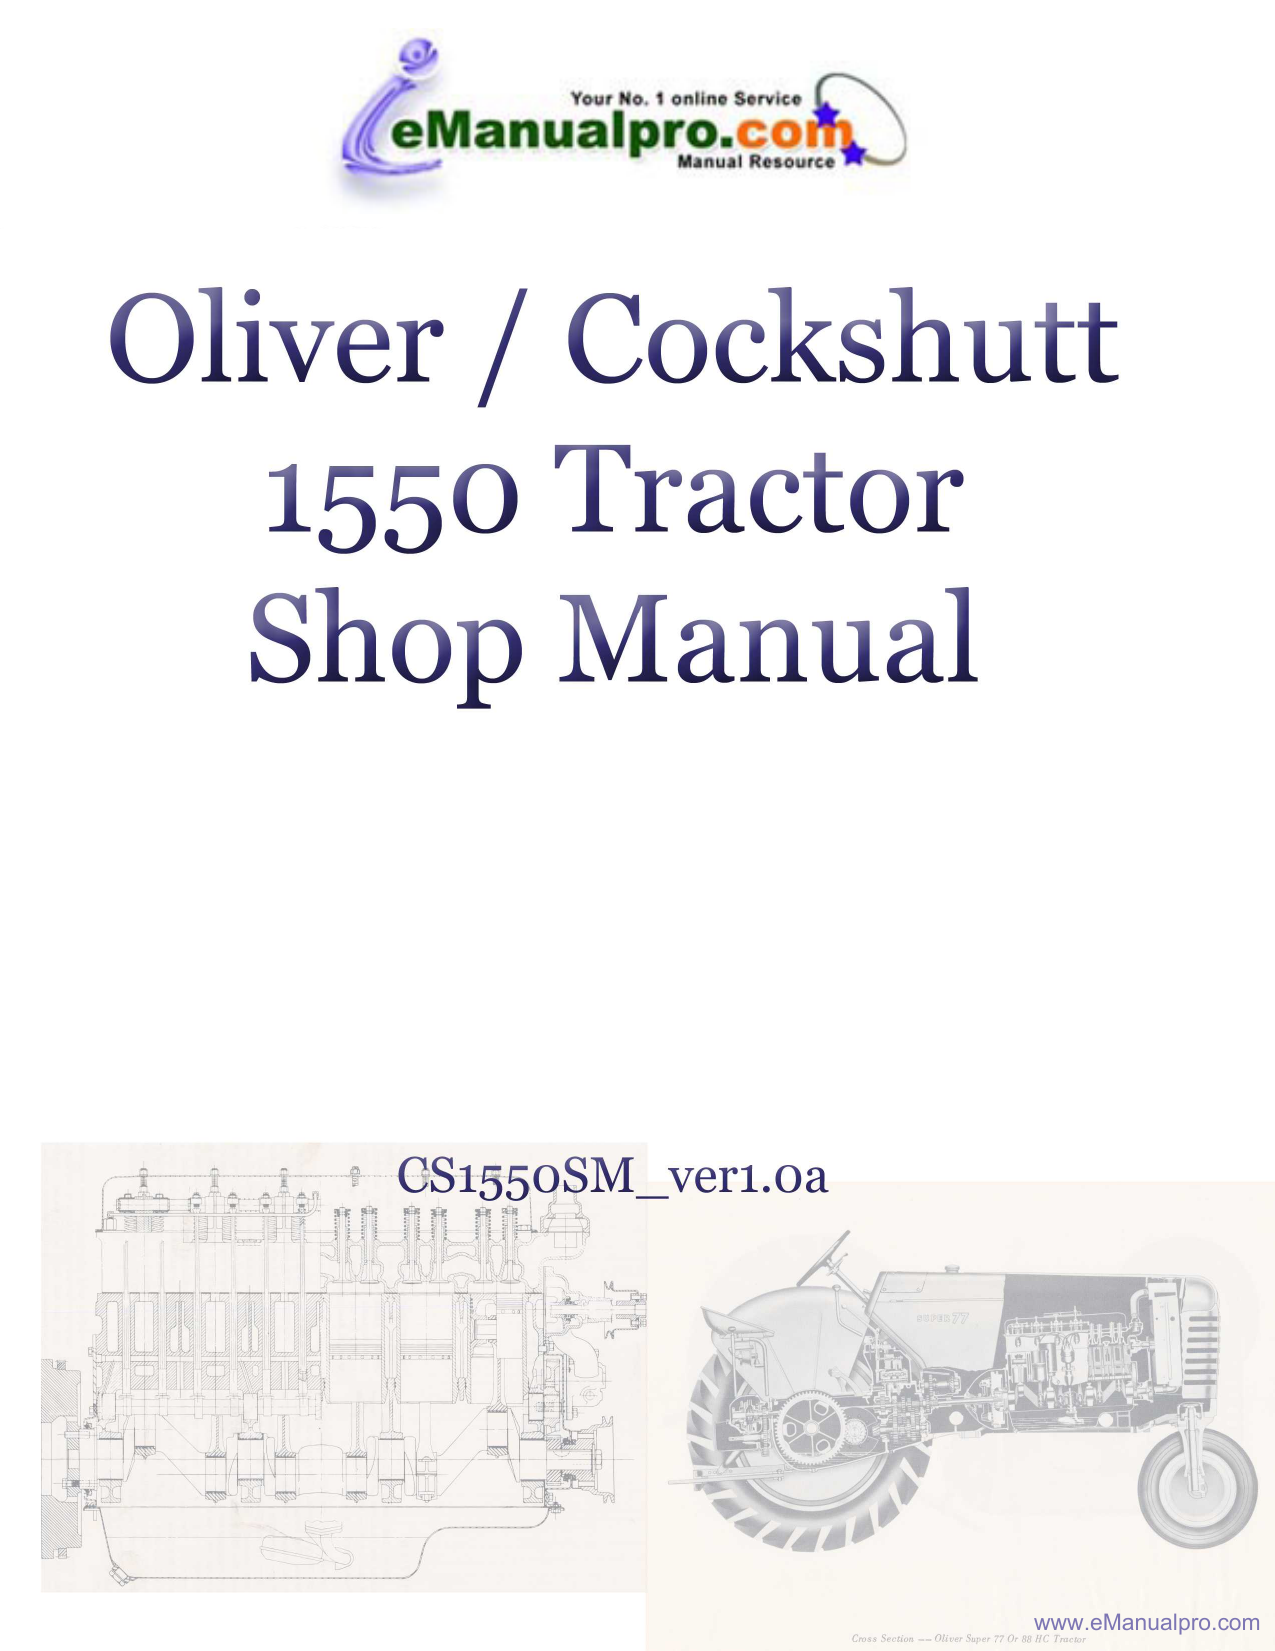 1965-1969 Oliver™ Cockshutt 1550 row-crop tractor shop manual Preview image 6